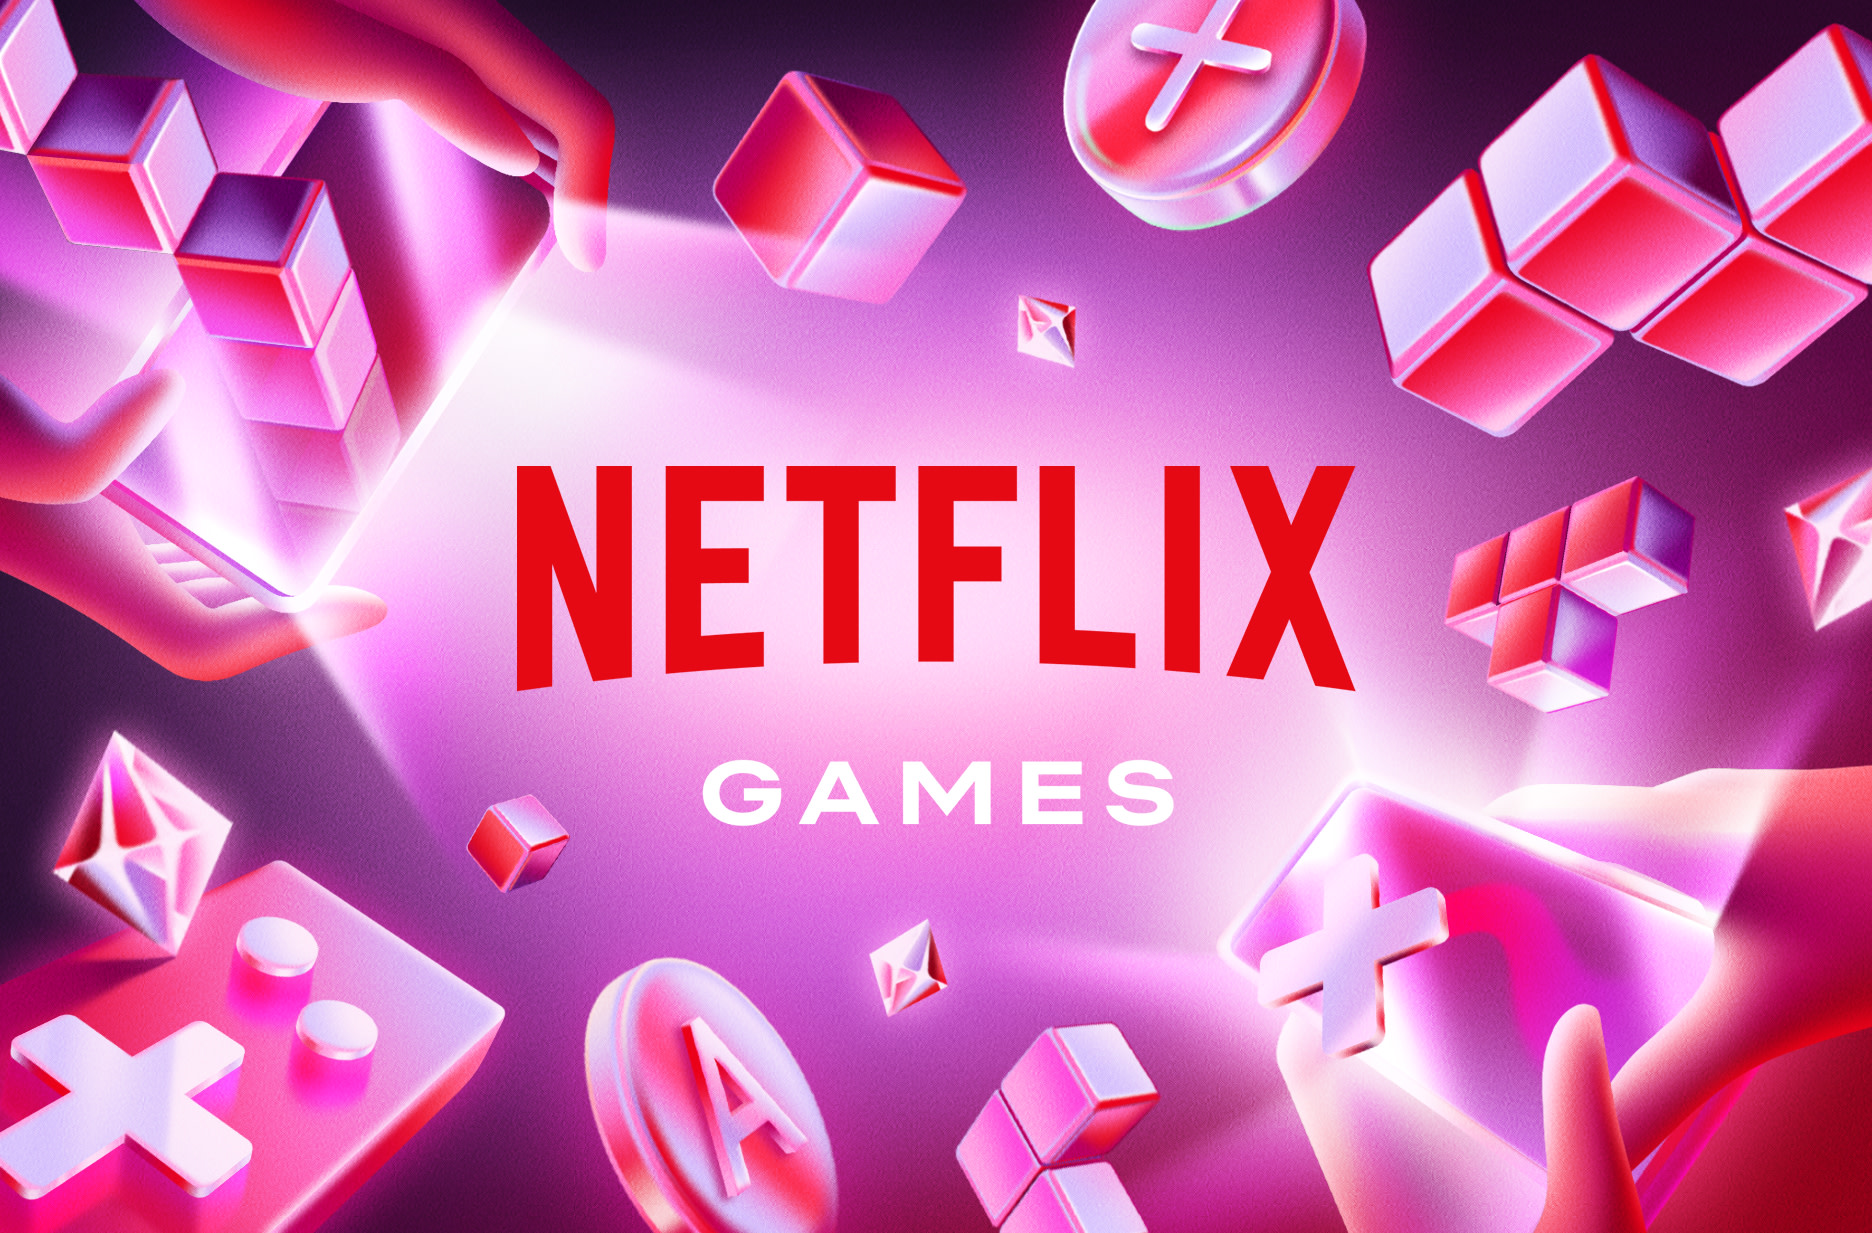 Netflix Appears Desperate To Monetize Its Games, Has Over 90 Games In Development